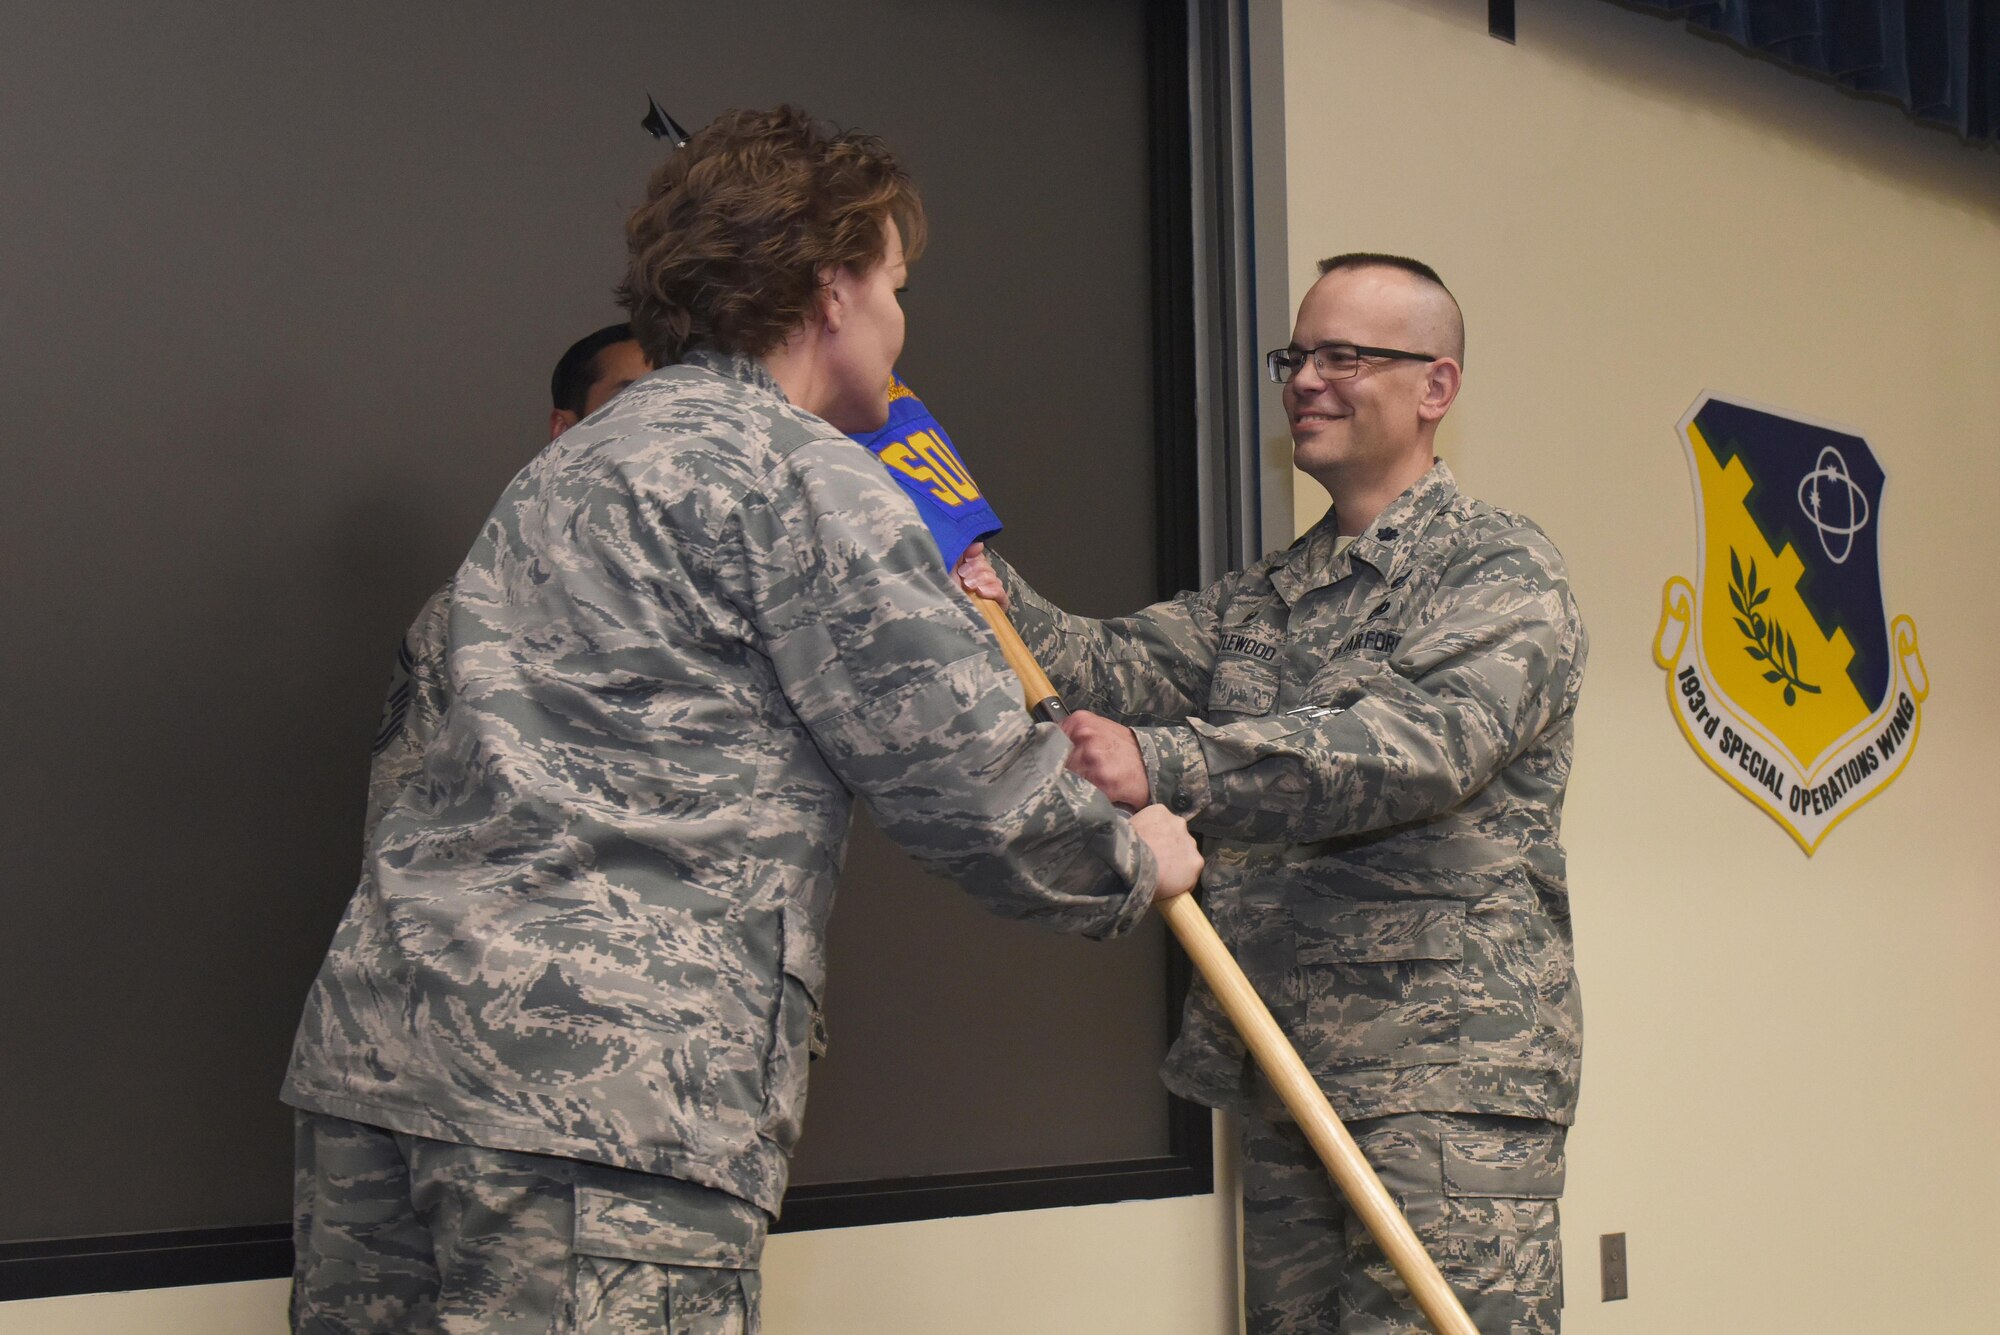 Lt. Col. Susan Garrett, commander, 193rd Special Operations Mission Support Group, presents the guidon to Lt. Col. Keith Littlewood, the new 193rd Special Operations Logistics Readiness Squadron commander, during an assumption of command ceremony June 11, 2017. The ceremony began with preliminary honors and concluded with the symbolic passing of the guidon. (U.S. Air National Guard photo by Tech. Sgt. Claire Behney/Released)